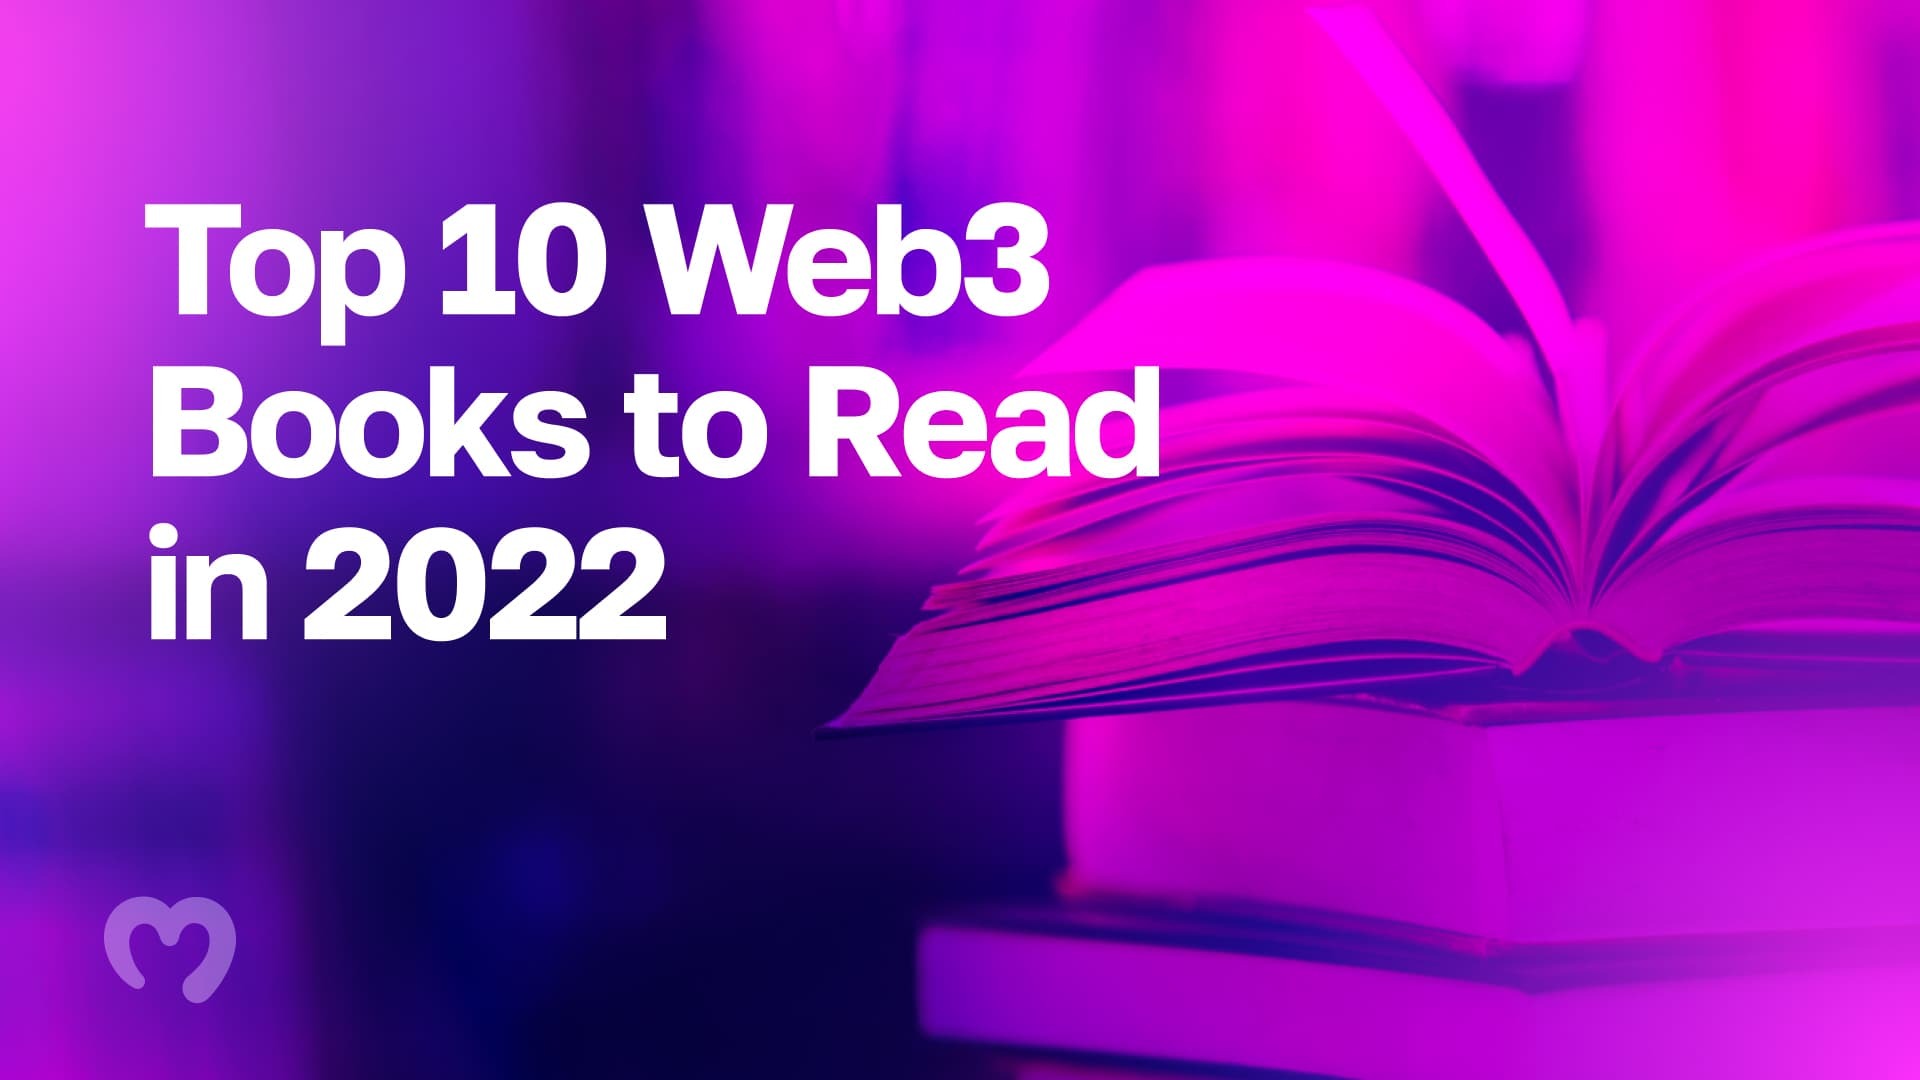 22_09_Top-10-Web3-Books-to-Read-in-2022